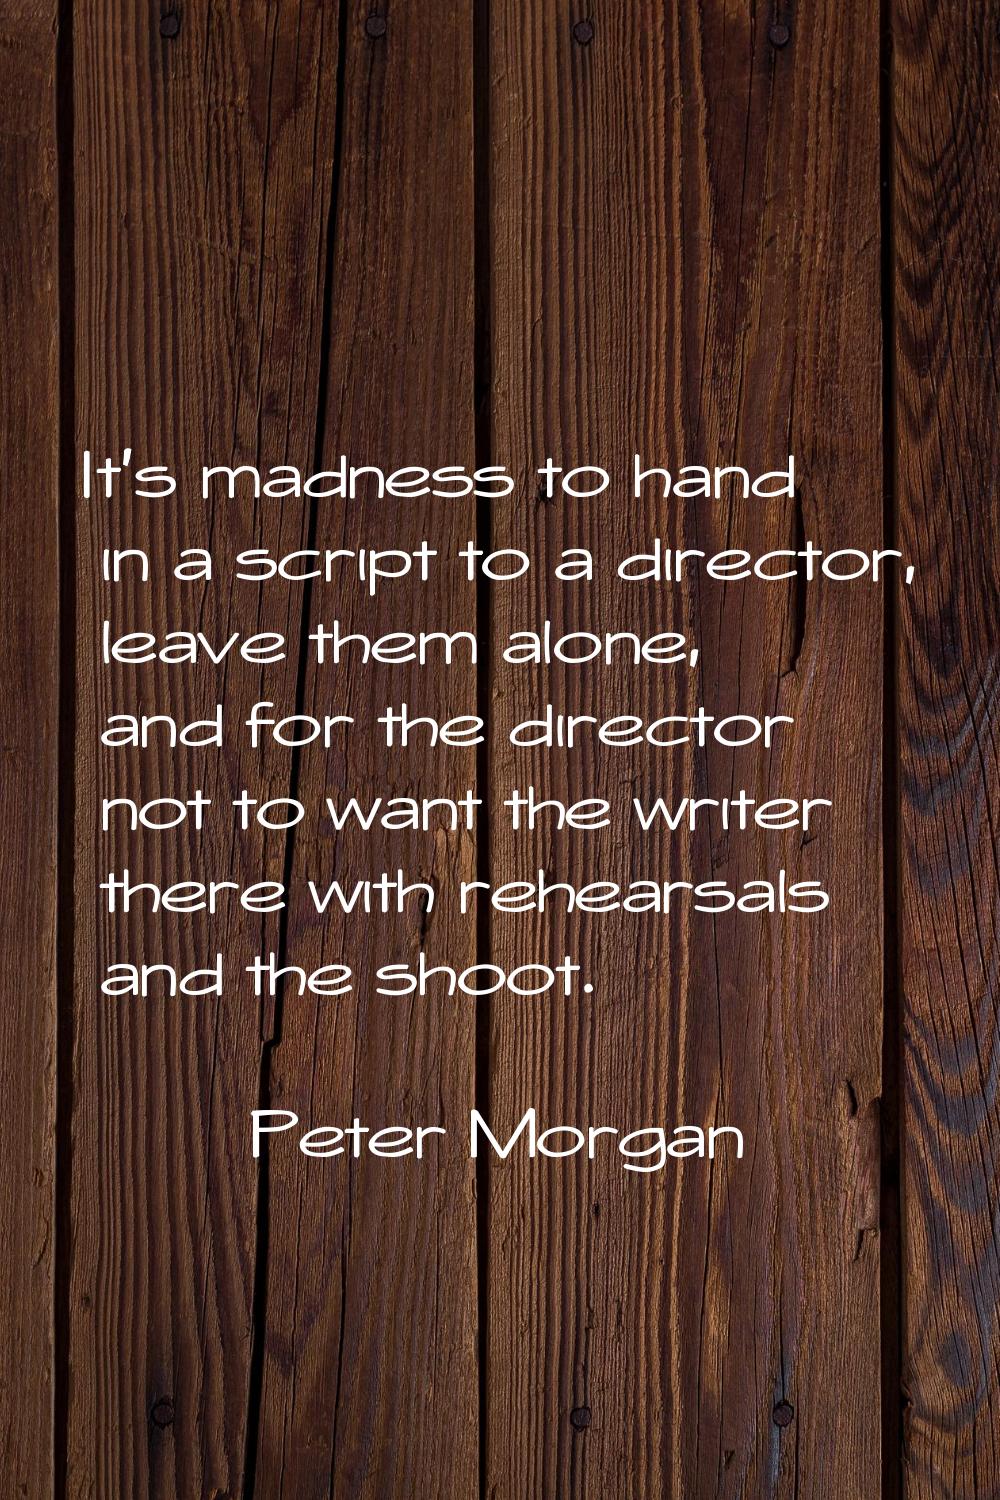 It's madness to hand in a script to a director, leave them alone, and for the director not to want 